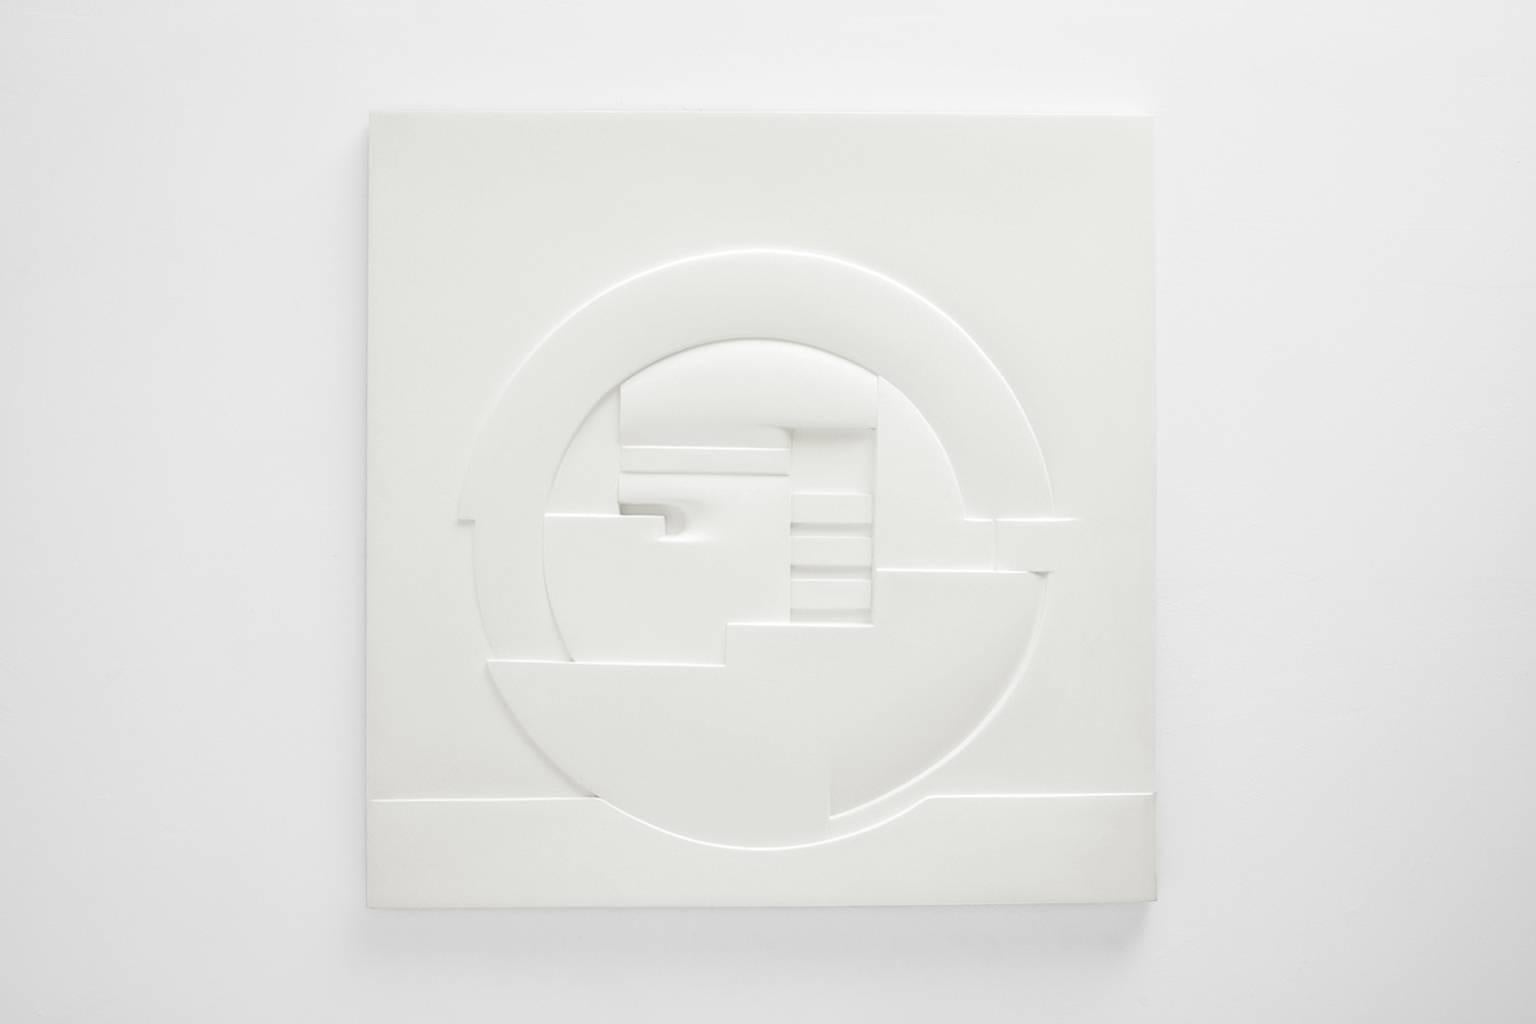 Beautiful abstract wall relief by Jan Verschoor (1943), Holland, 1983. studied at the Rijksacademie of Amsterdam. Verschoor worked in different materials such as bronze, brass, marble aluminum, steel and plastic. This relief is made of polyester.